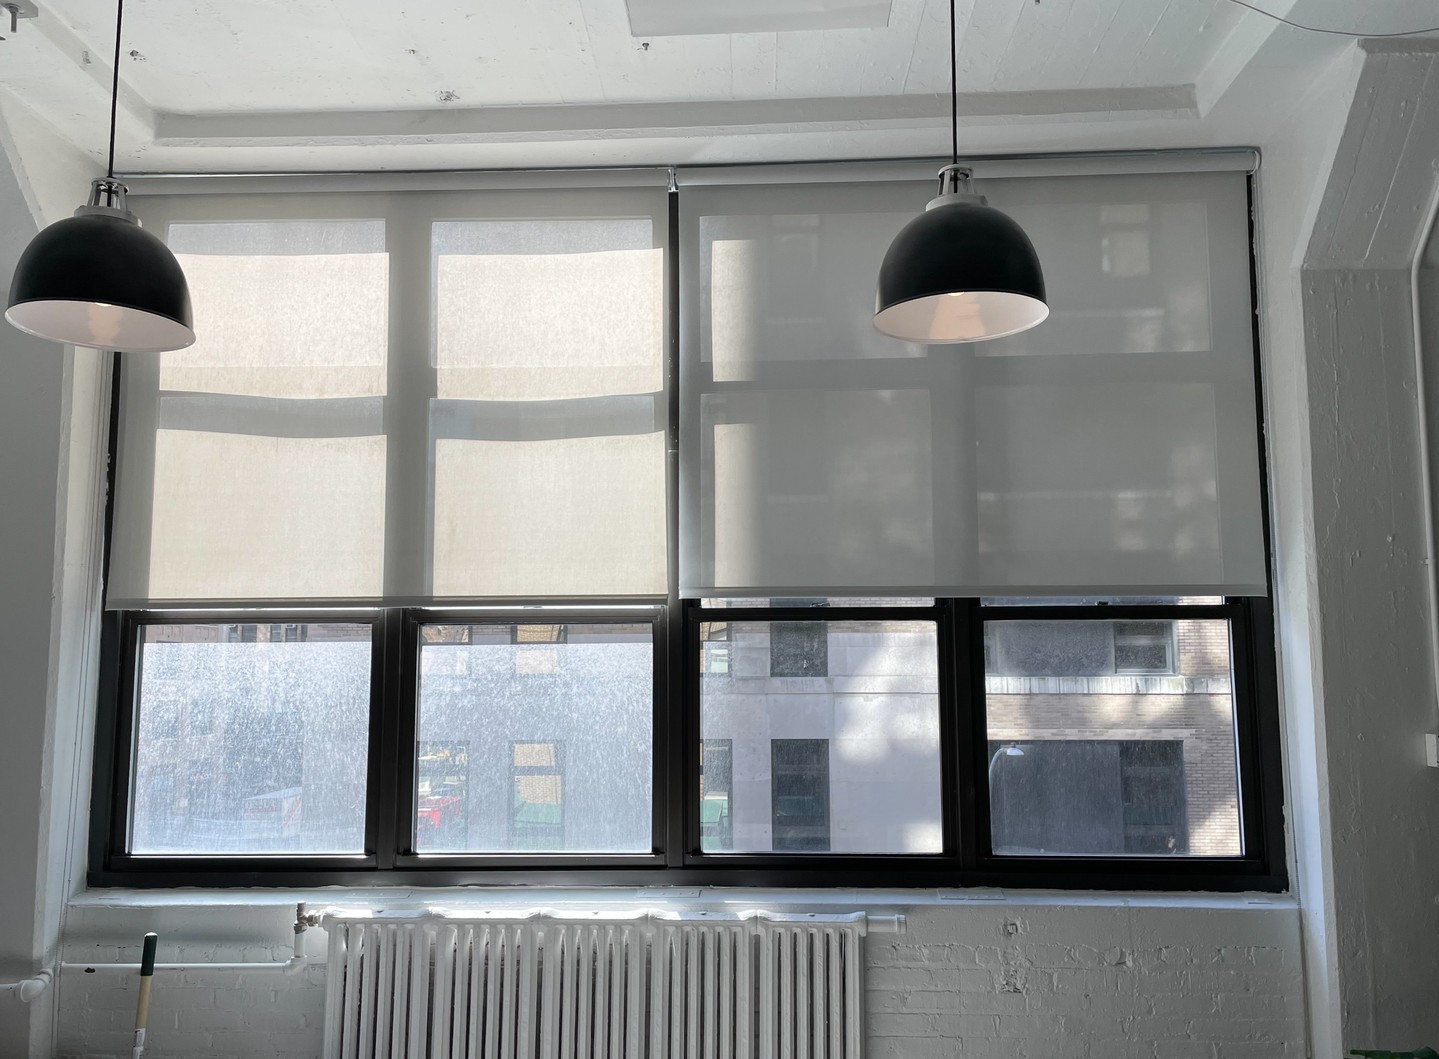 Roller shades that not only look good but offer sun solutions = win-win! 😎🎉 
#sunsolution #happymarch #corporateoffice #officedesign #interiordesign #architecture #business #newbusiness #windowcoverings